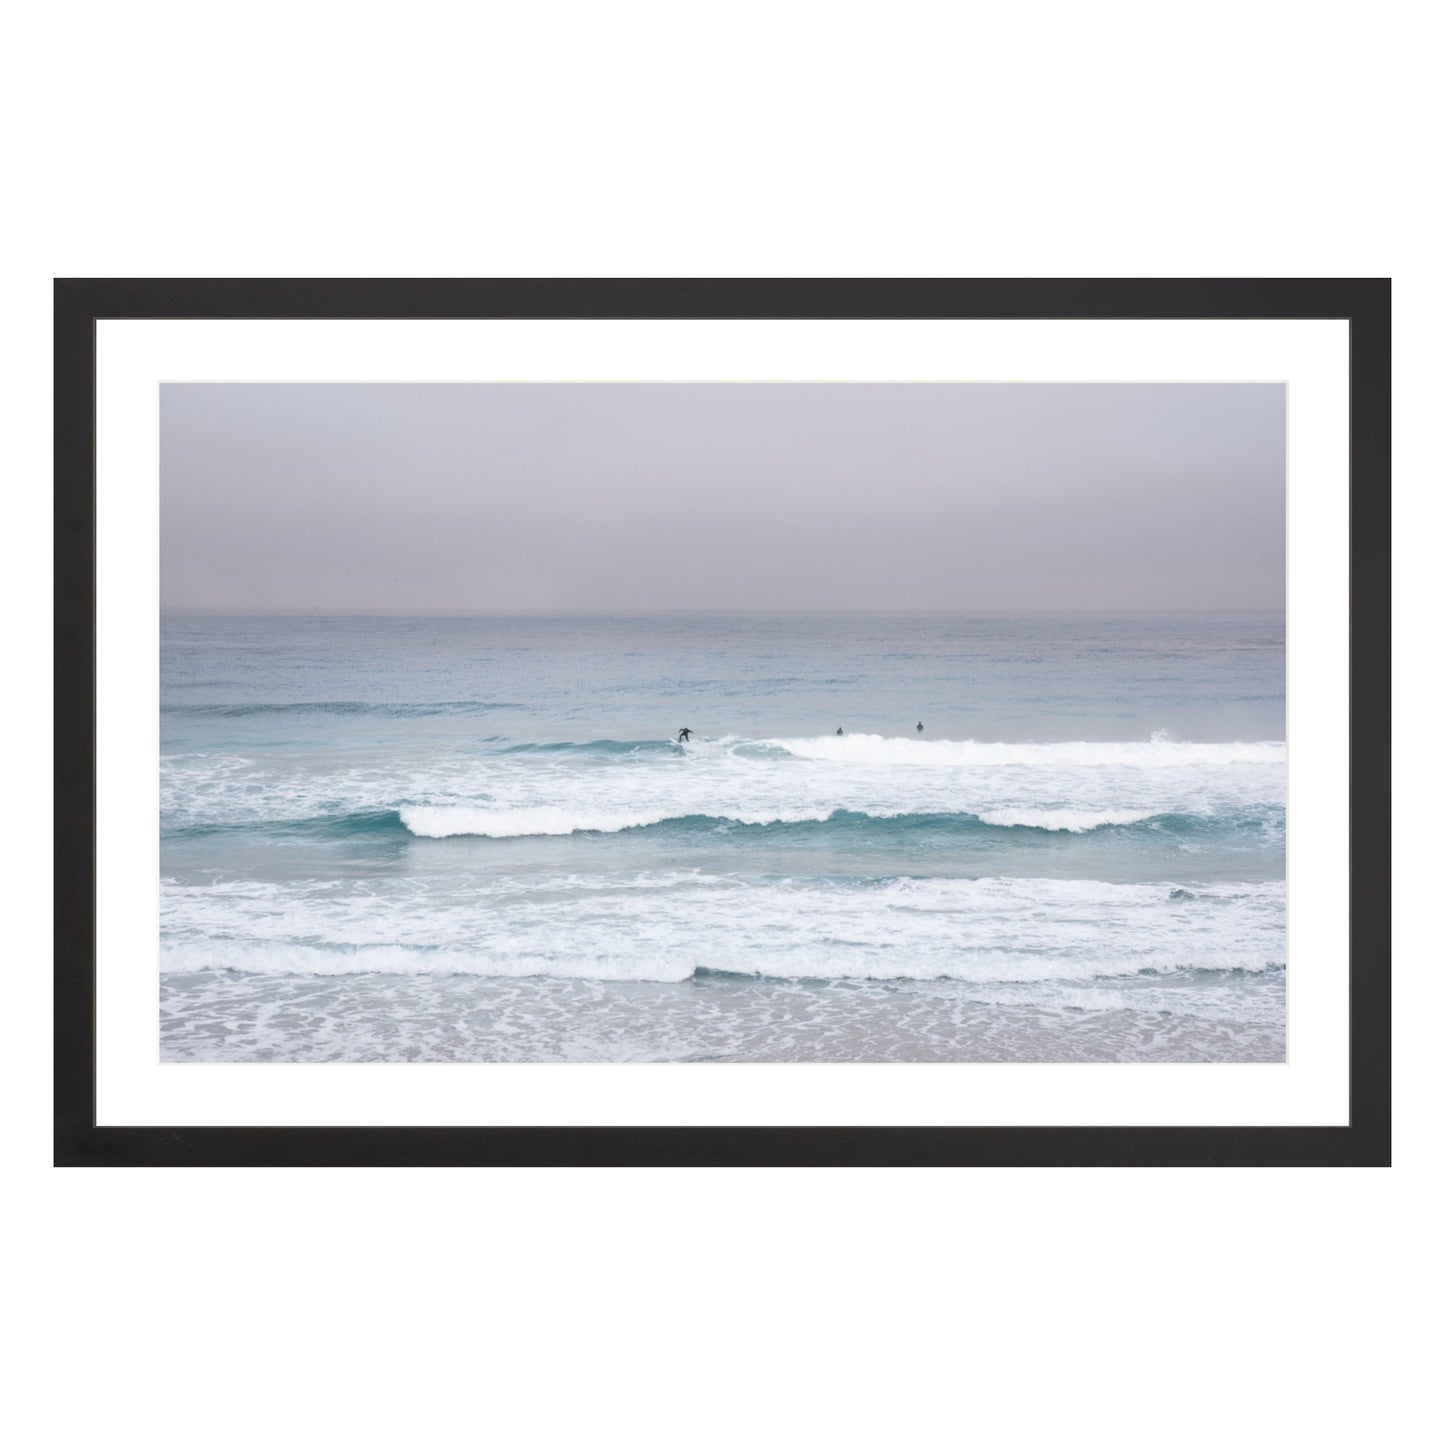 Photograph of surfers on Carmel coast, California framed in black with white mat